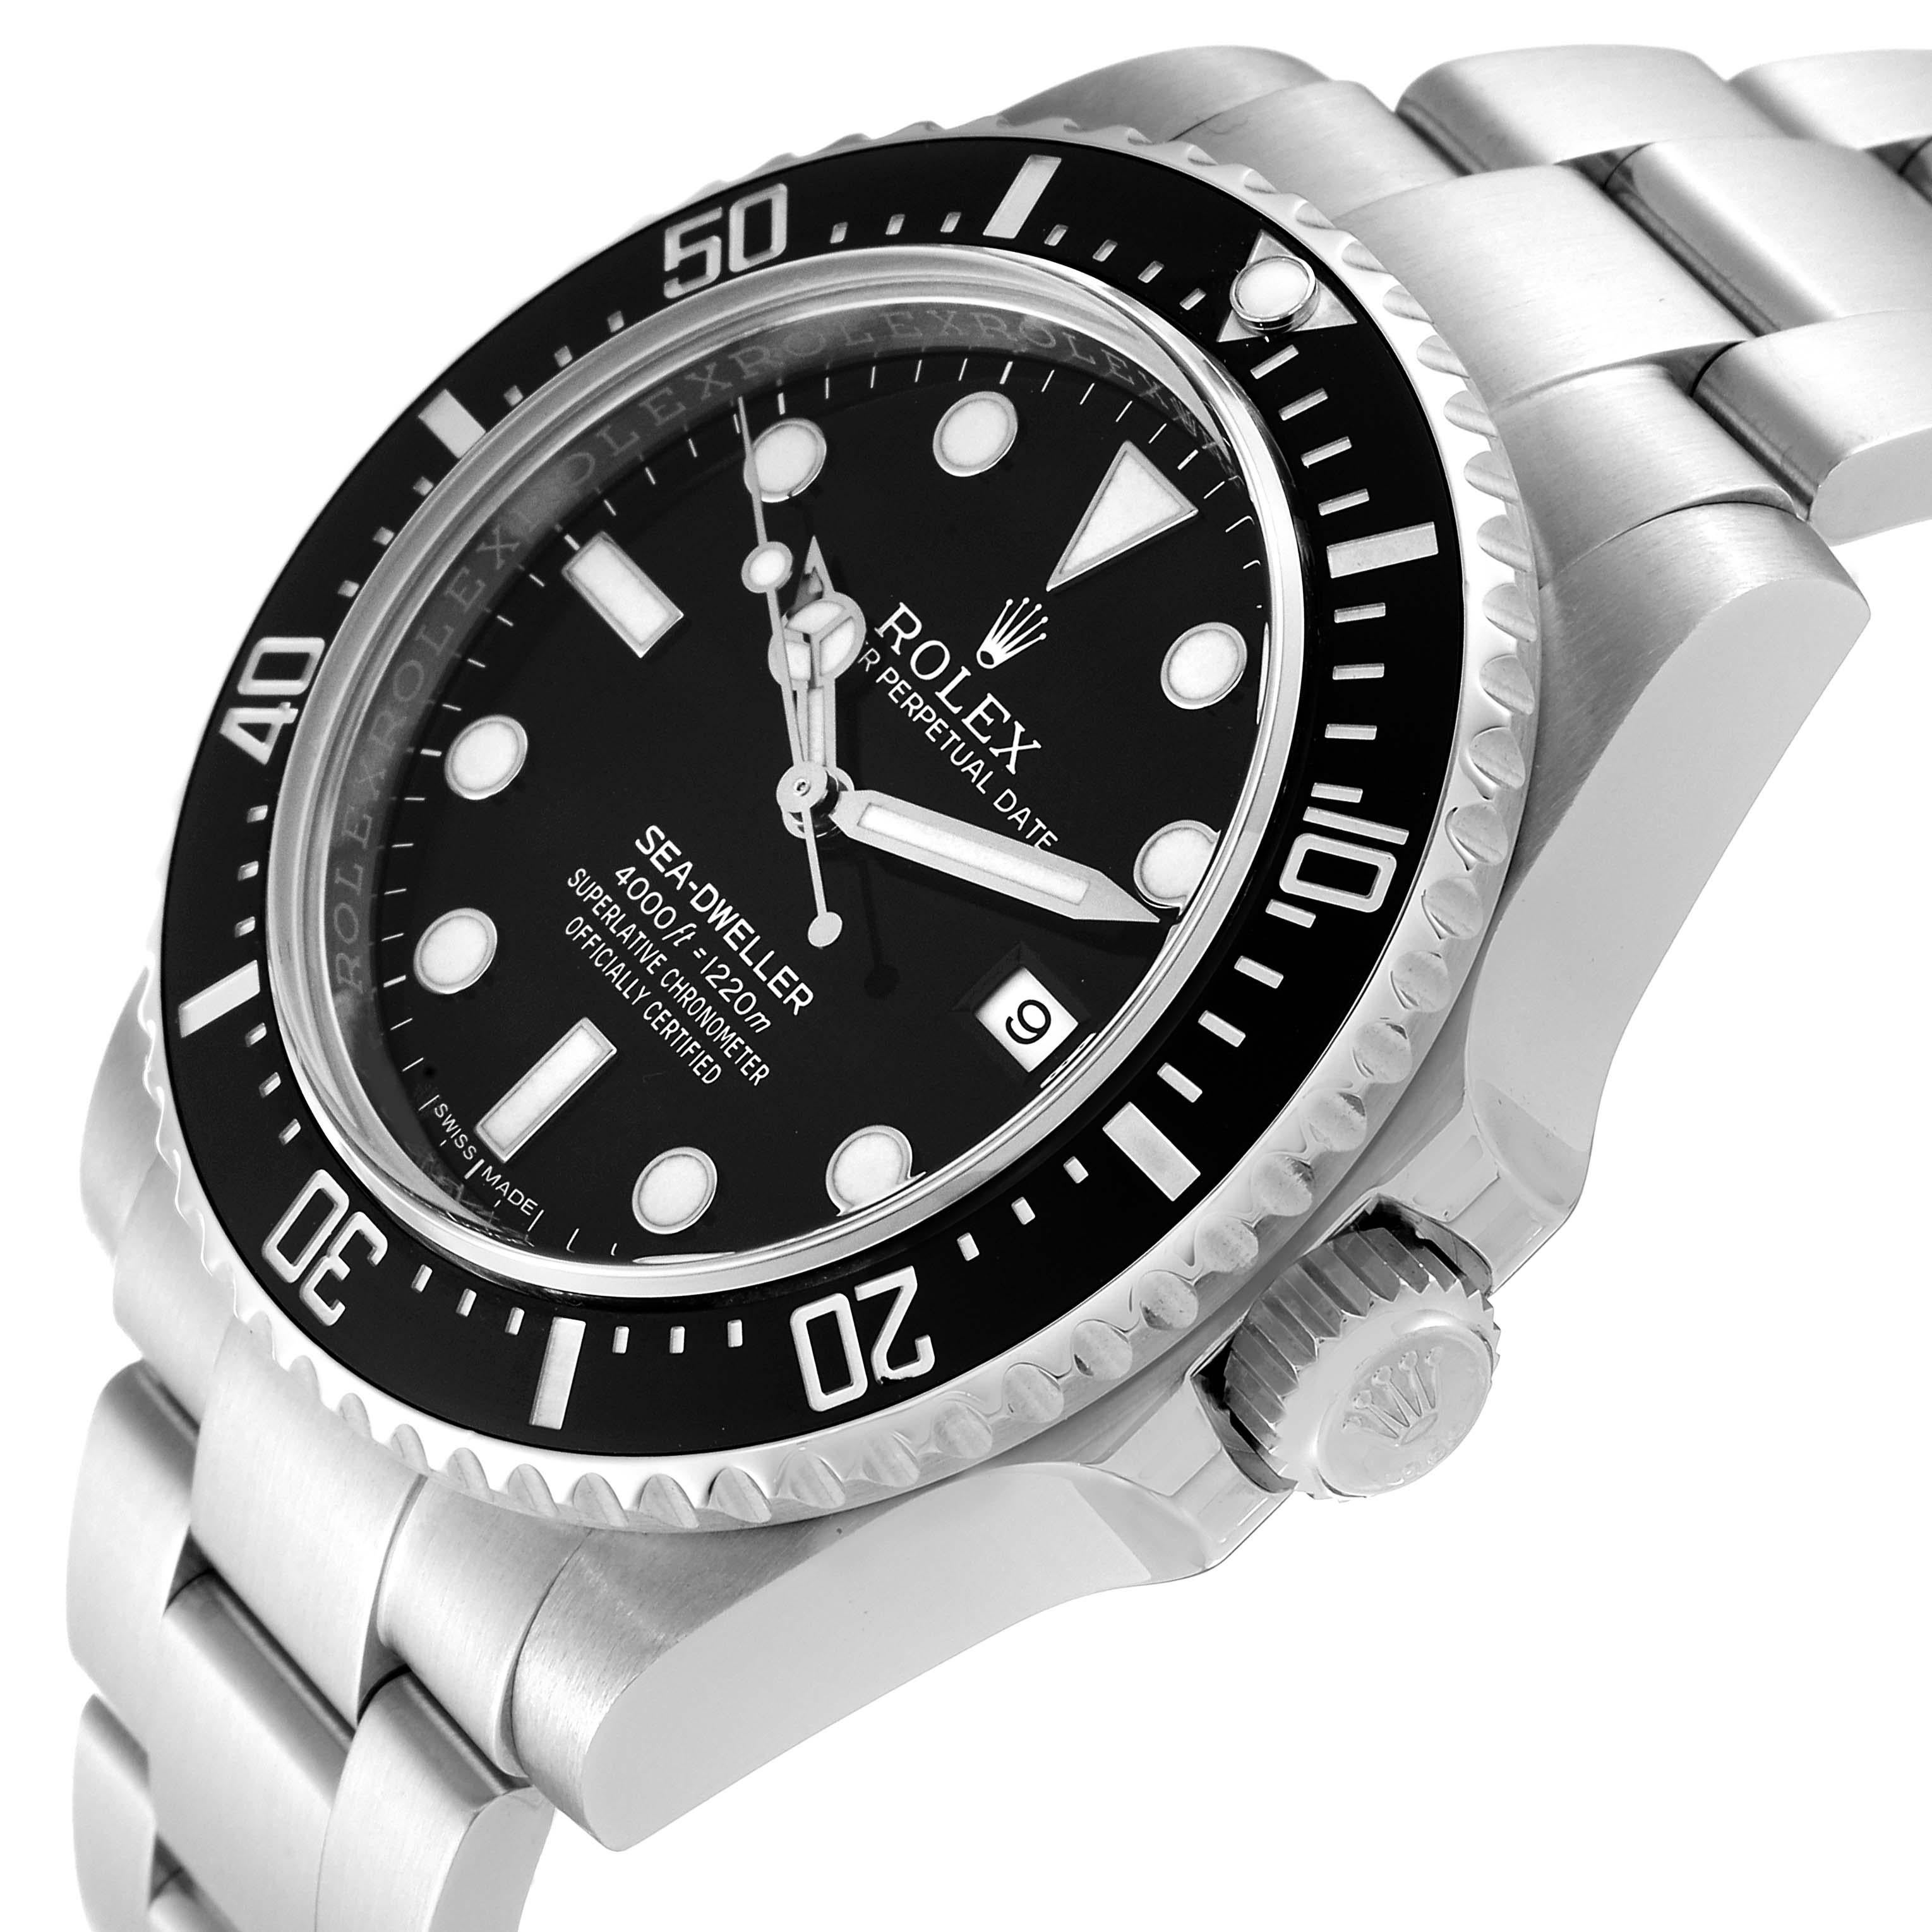 Rolex Seadweller 4000 Black Dial Automatic Steel Mens Watch 116600 For Sale 5